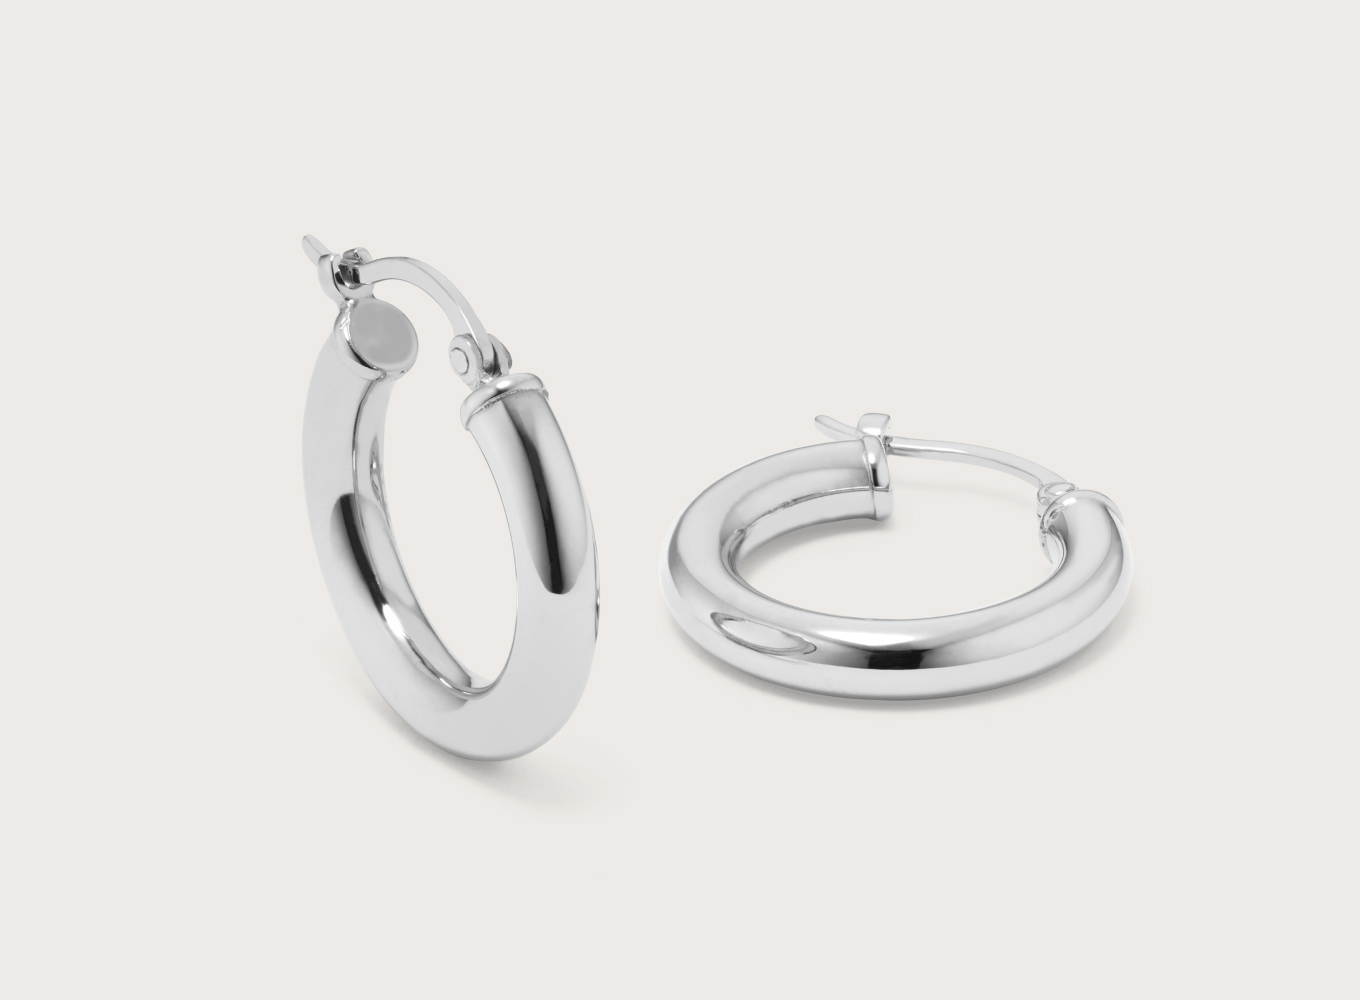 Classic Medium Sterling Silver Hoops These sterling silver hoops have a classic rounded profile and lightweight feel that’s perfect for every day. A lever back keeps these stylish earrings secure.